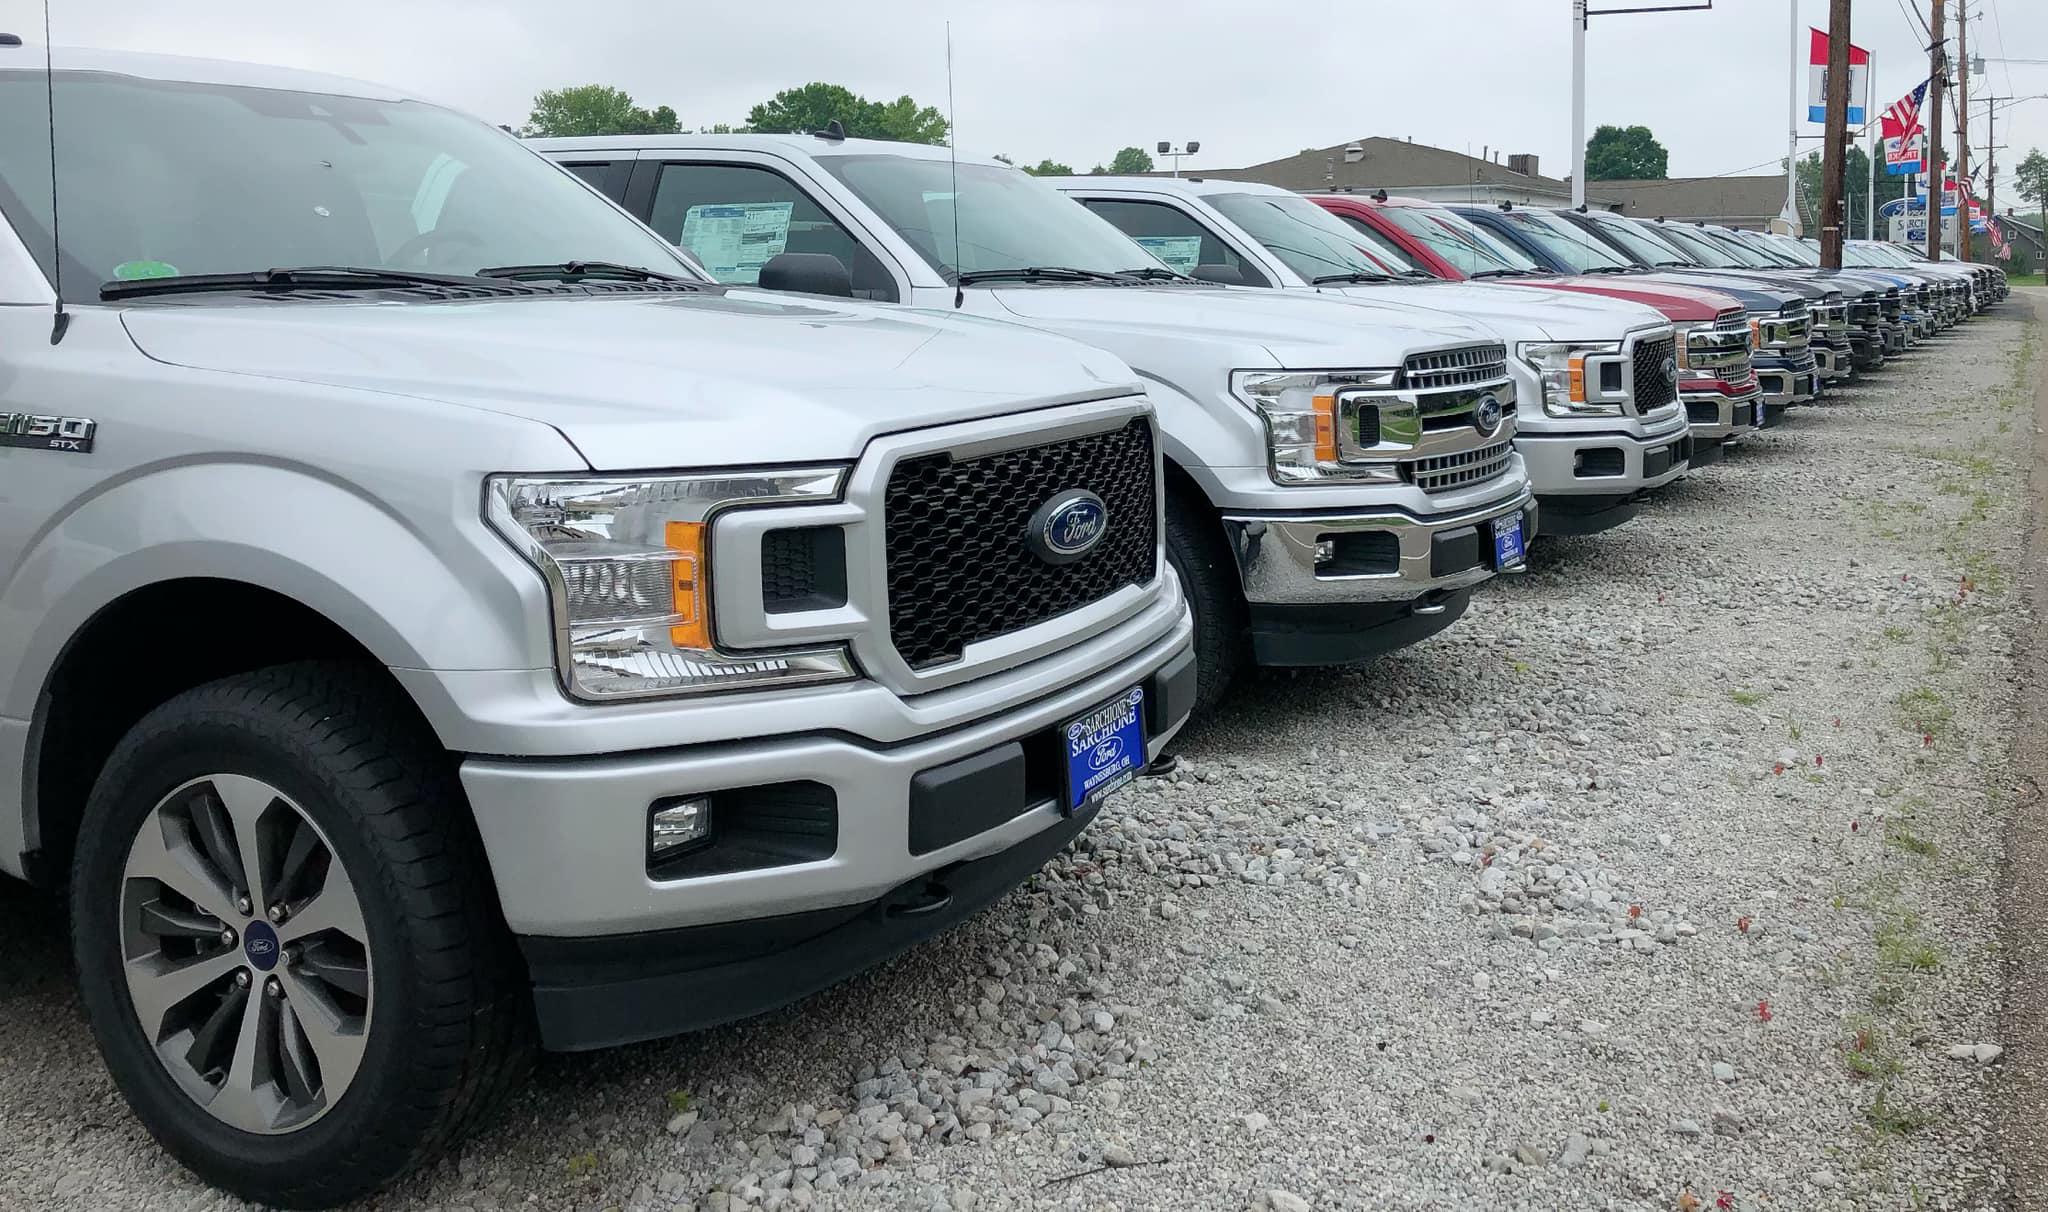 Head on down to our car lot and we'll help you find your dream vehicle!